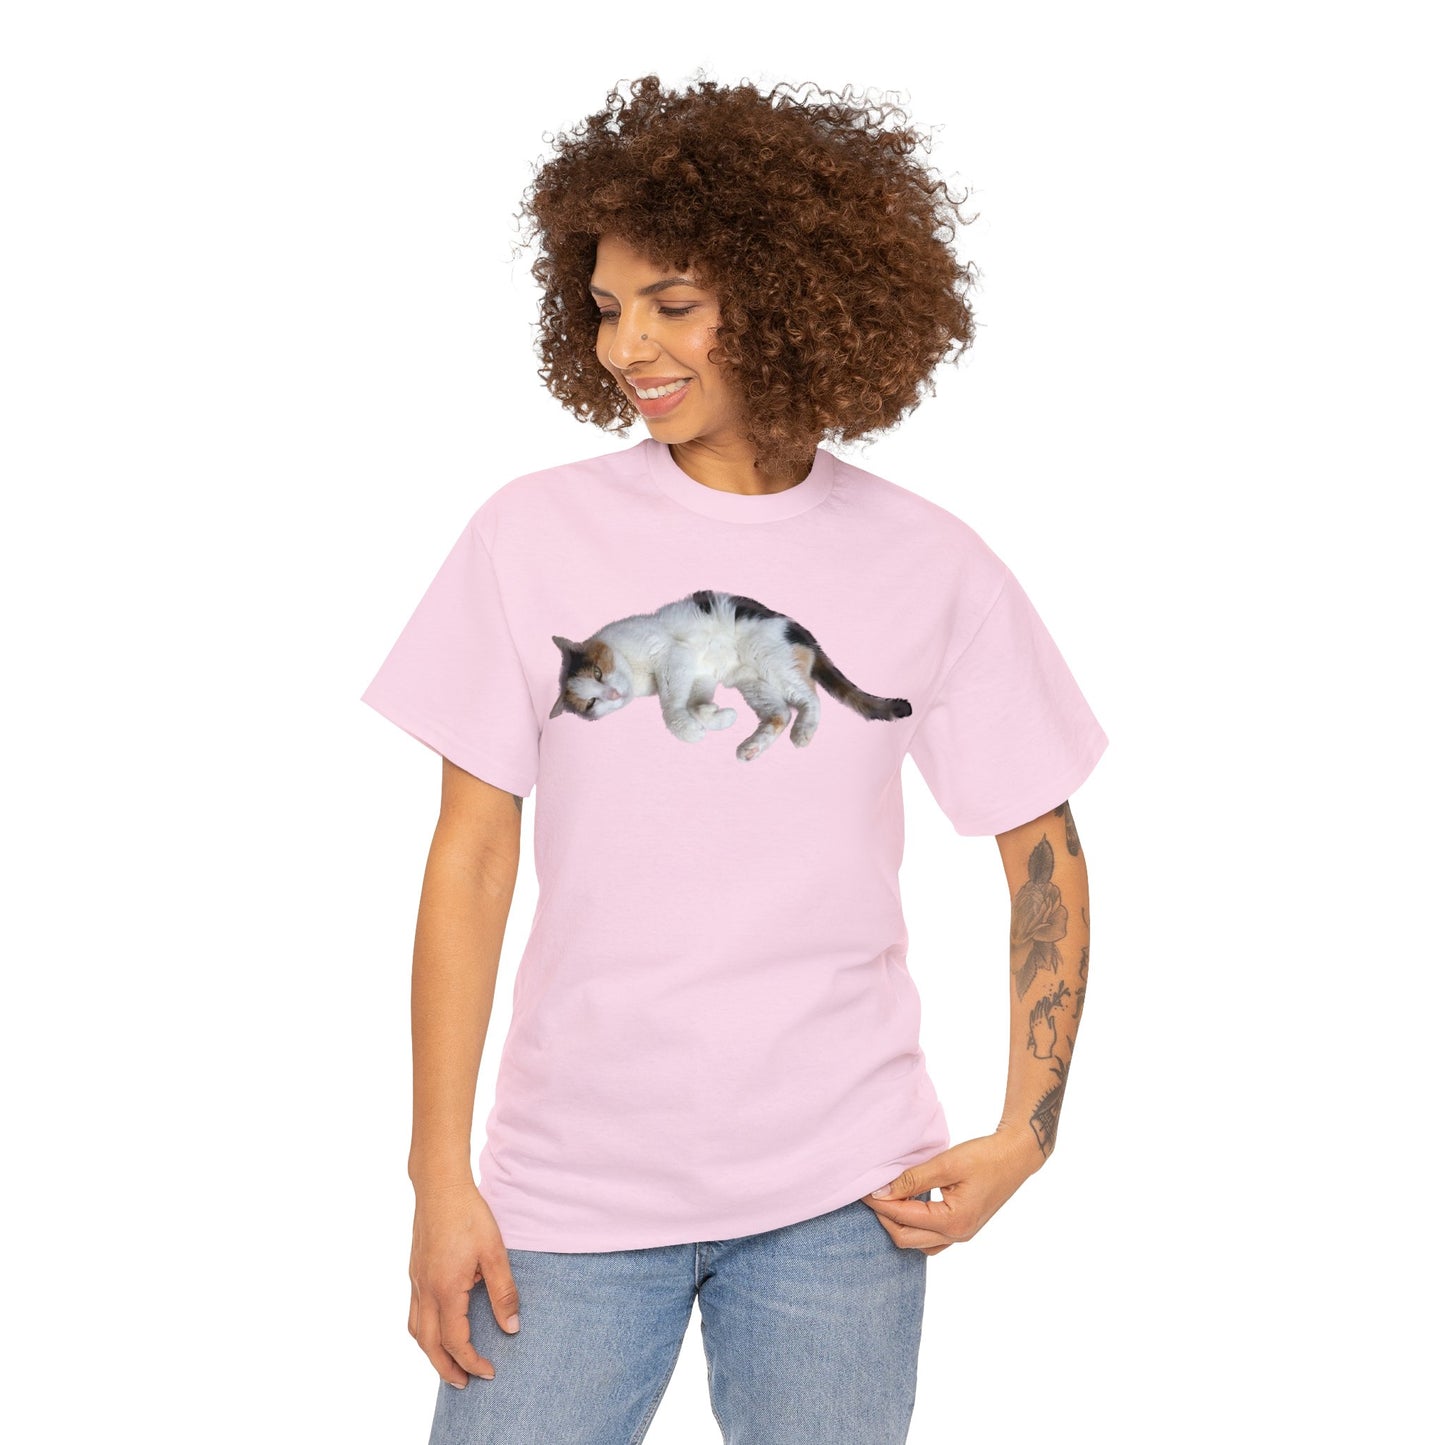 Snoozing Calico Cat Shirt, Cat T Shirt For Cat Person, Gift For Cat Mom, Cute Cat Gift, Kitten T Shirt